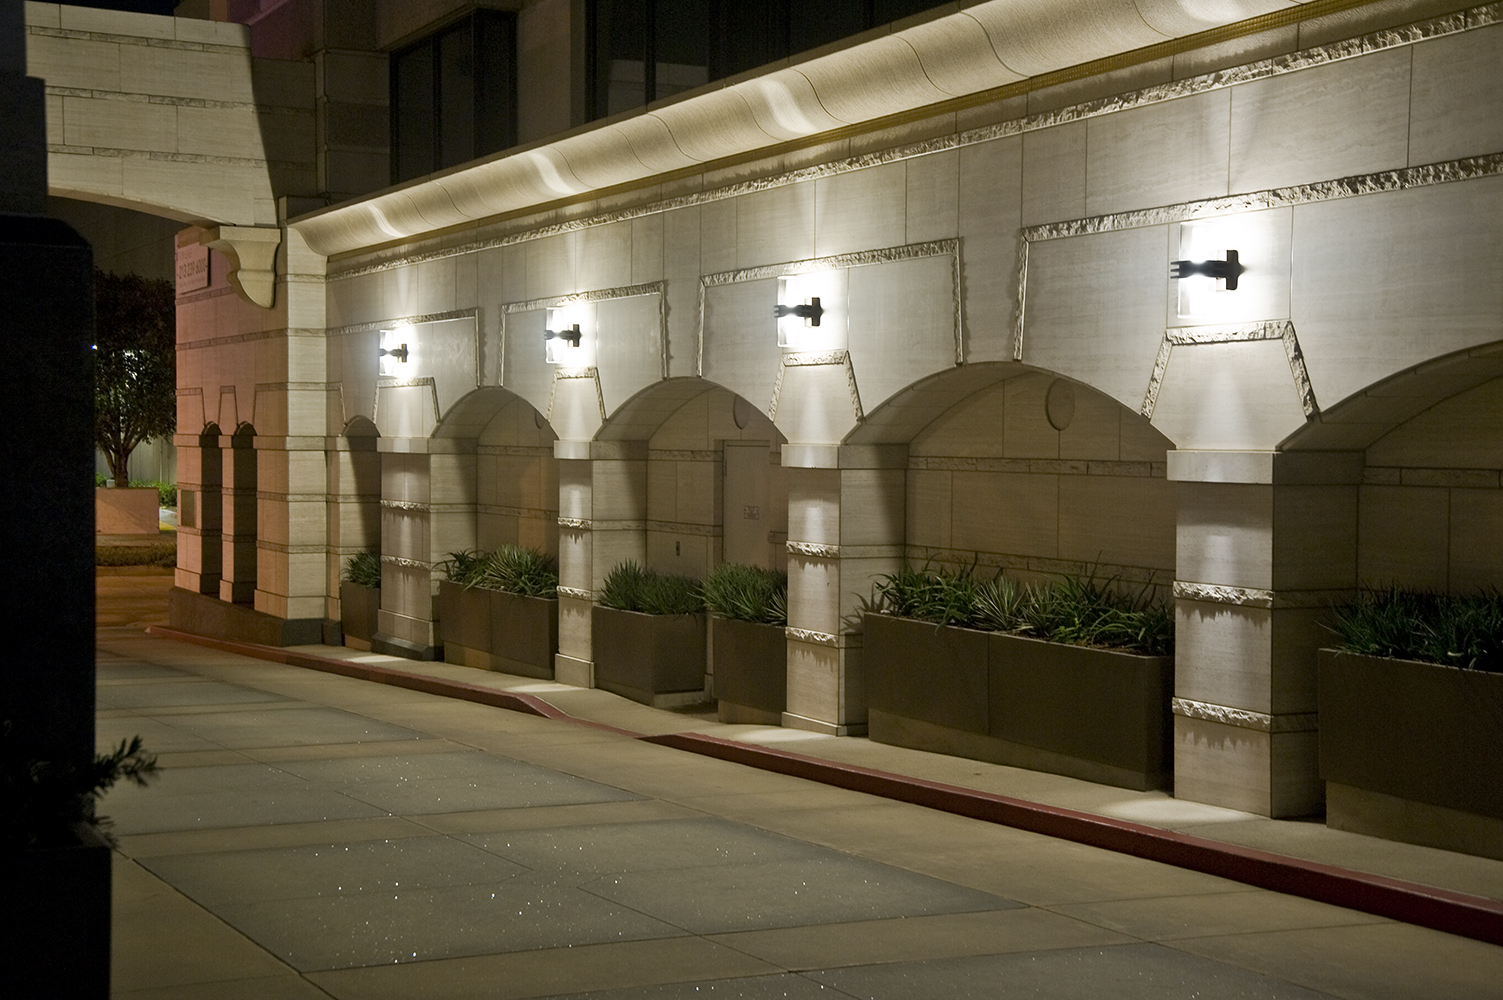 Pla outdoor light fixtures provide uplight and downlight on a classic arch structure along a city street at night.